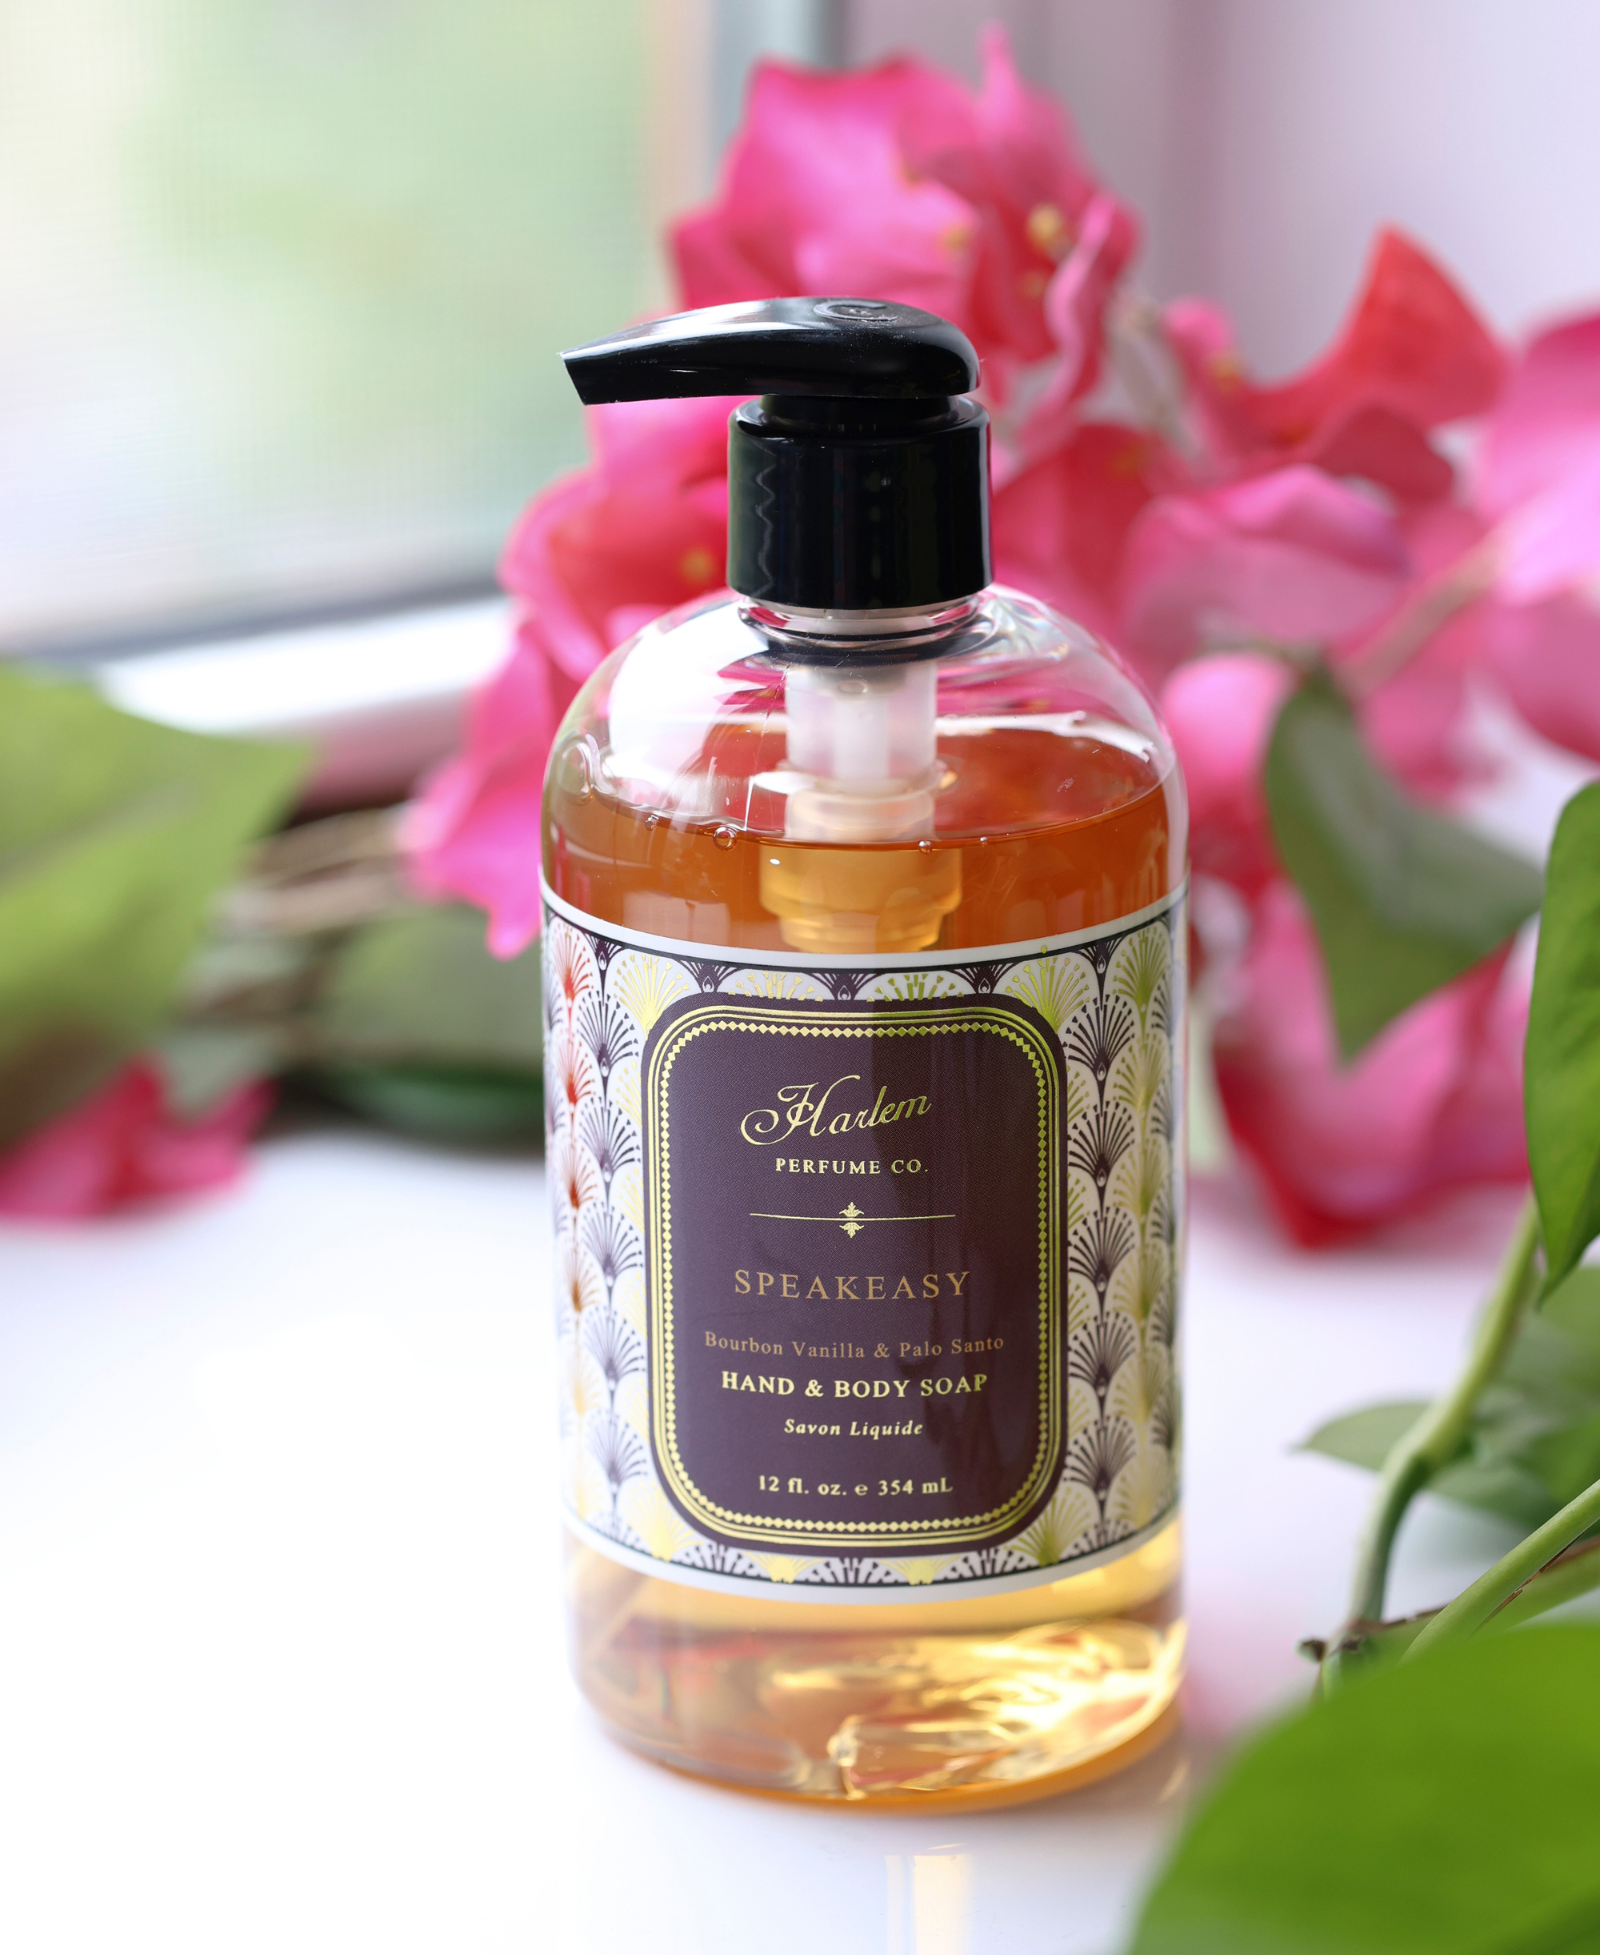 This is an image of our Speakeasy Soap pictured next to pink flowers.  The bottle has a black pump and the label has a unique Art Deco print with the details of the soap/